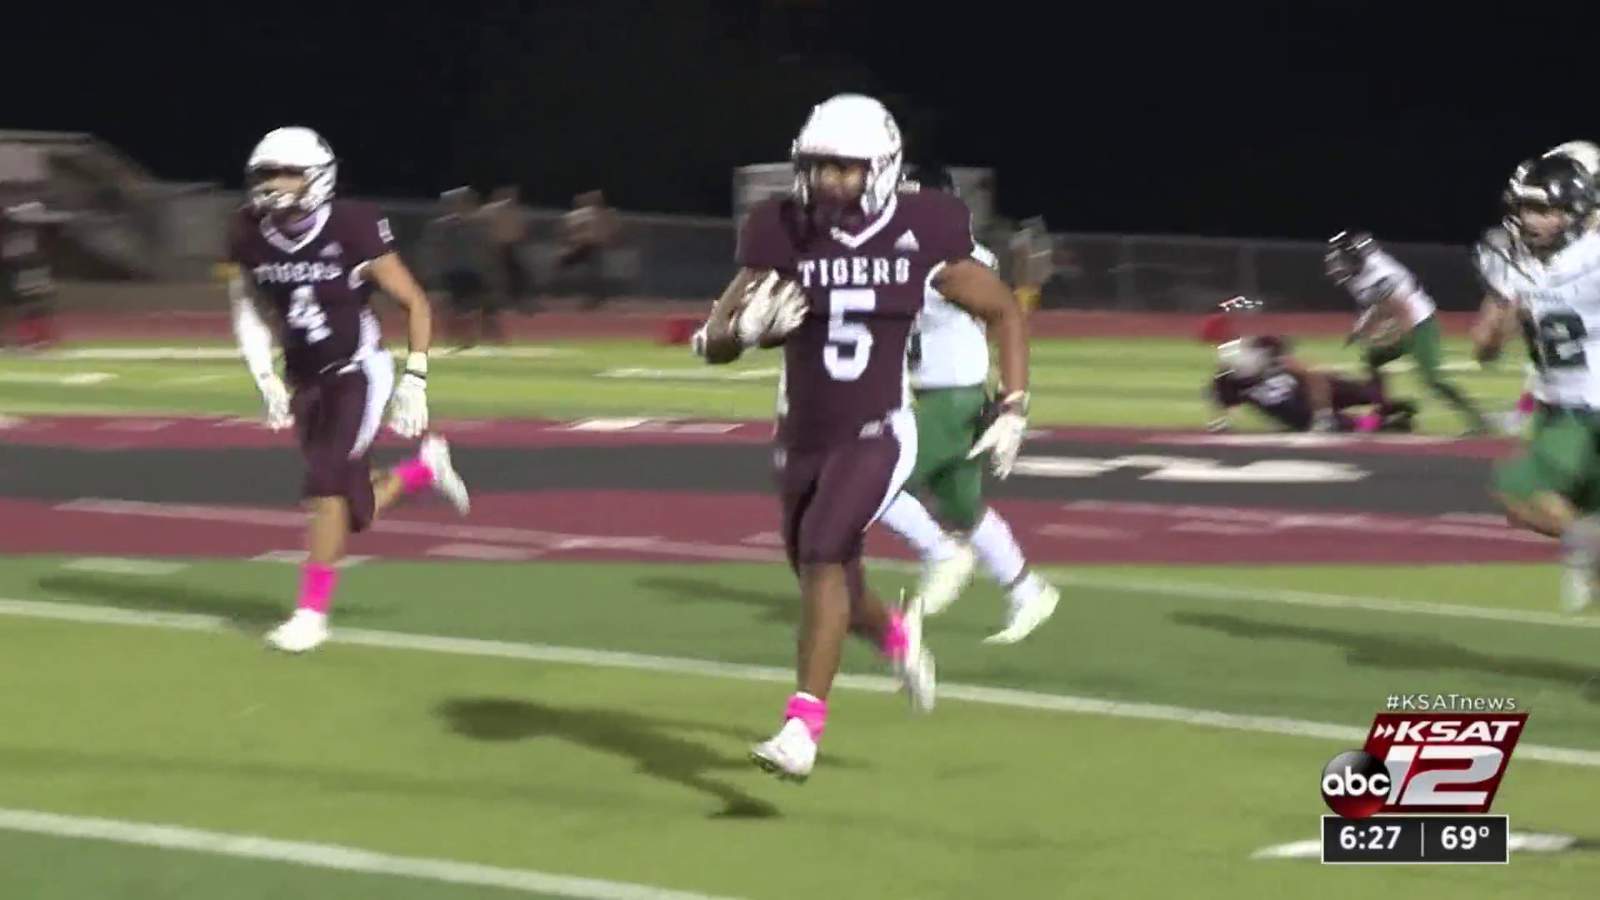 Floresville’s Dareion Murphy having remarkable season after recovering from car wreck in 2019